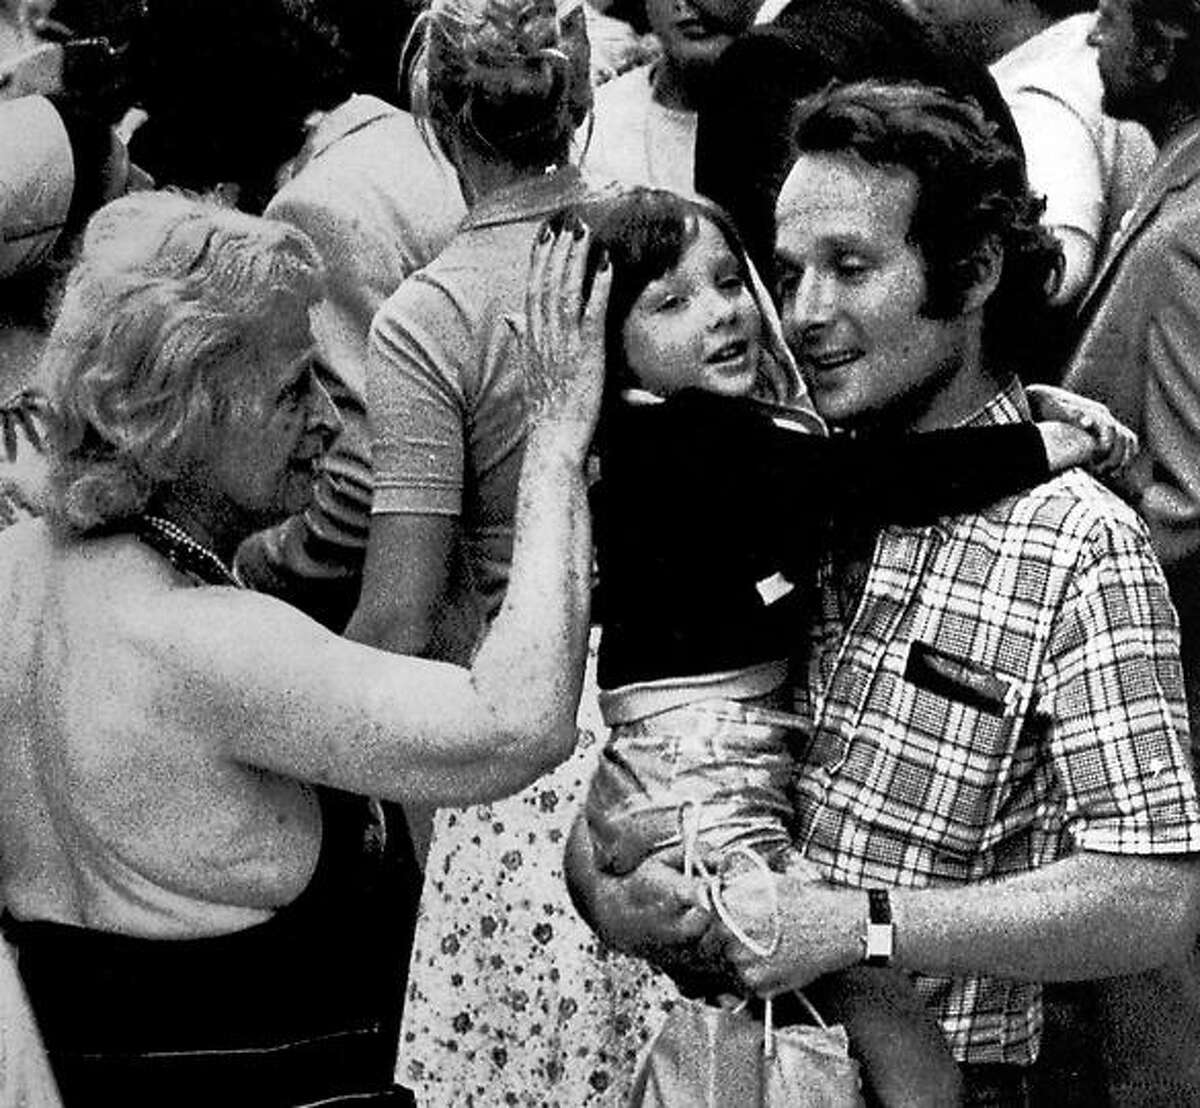 A father holds his daughter in his arms while a relative pats her head after the girl was flown to Orly Airport in Paris from Entebbe, Uganda, June 30, 1976. She was among 46 hostages released by Palestinian hijackers and flown to Paris in an Air France plane. (AP Photo)